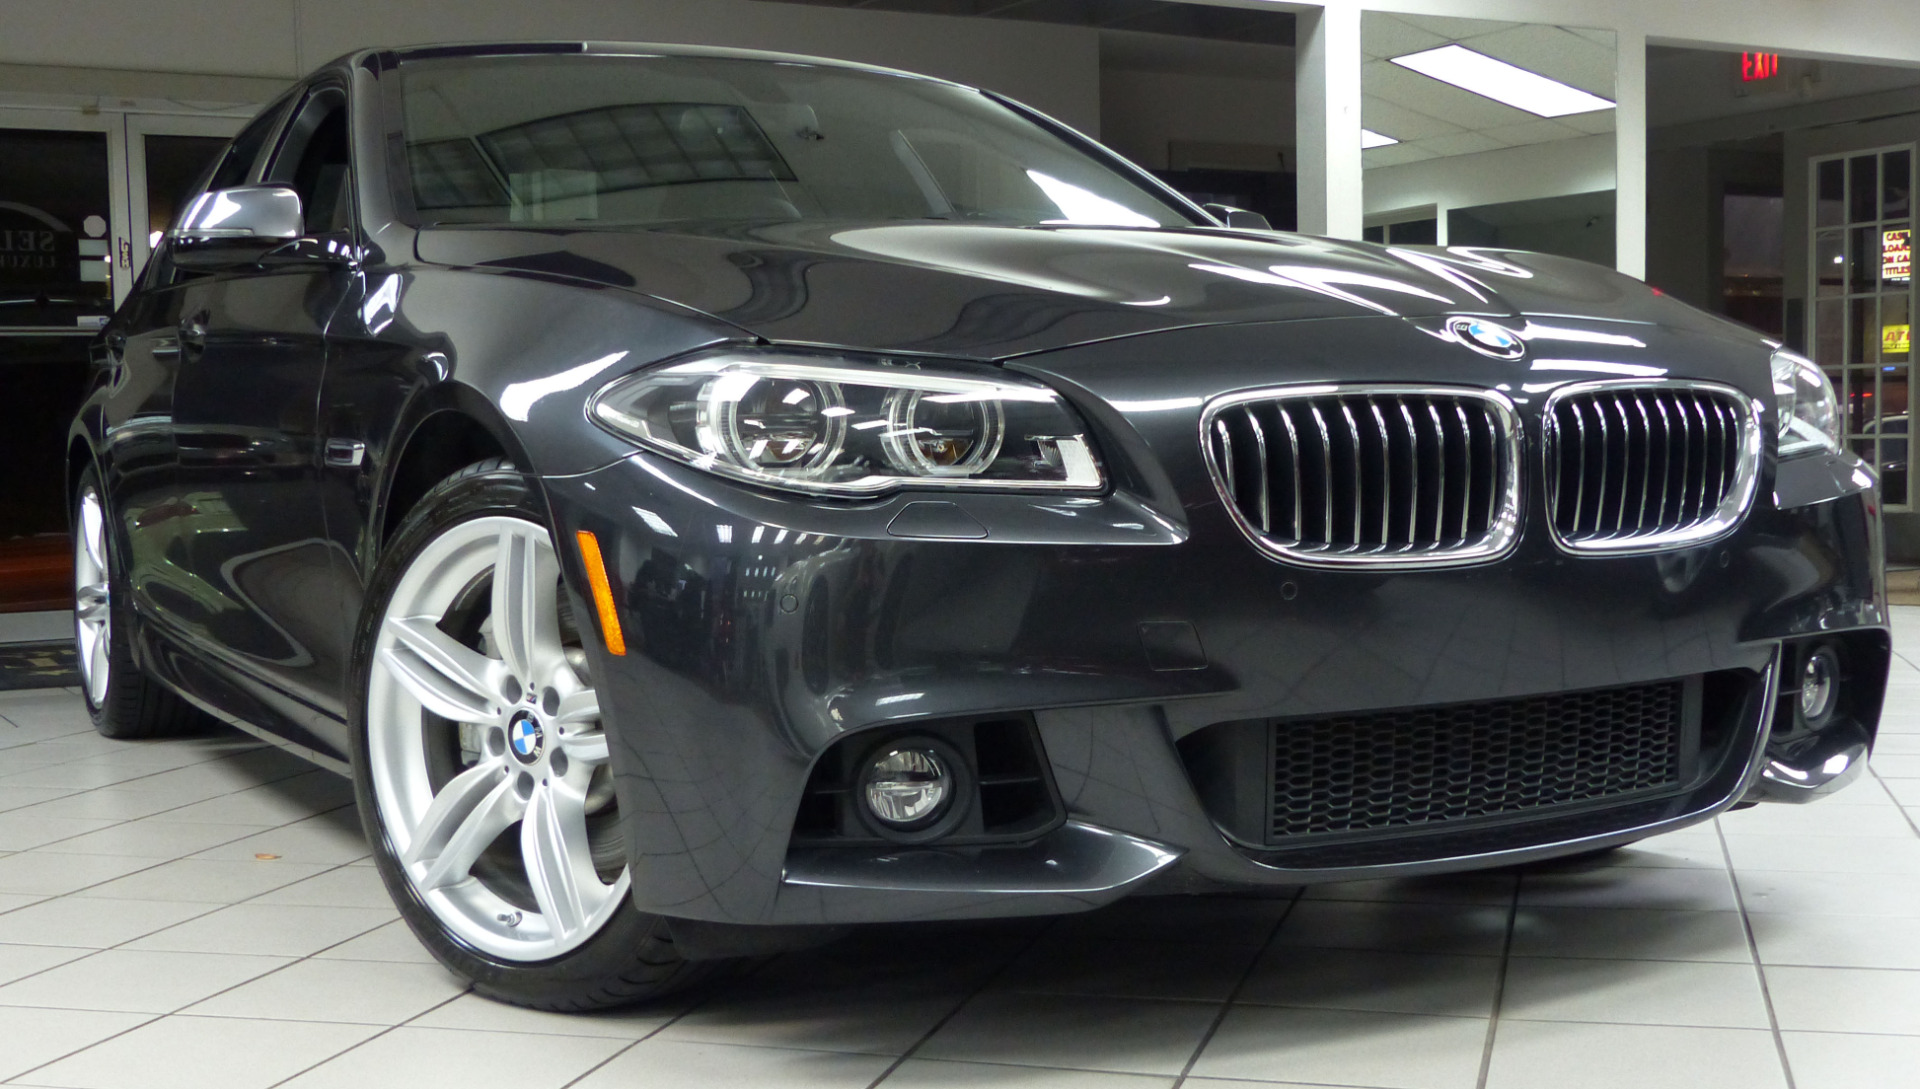 2014 Bmw 535I - BMW 535i 2014: Review, Amazing Pictures and Images